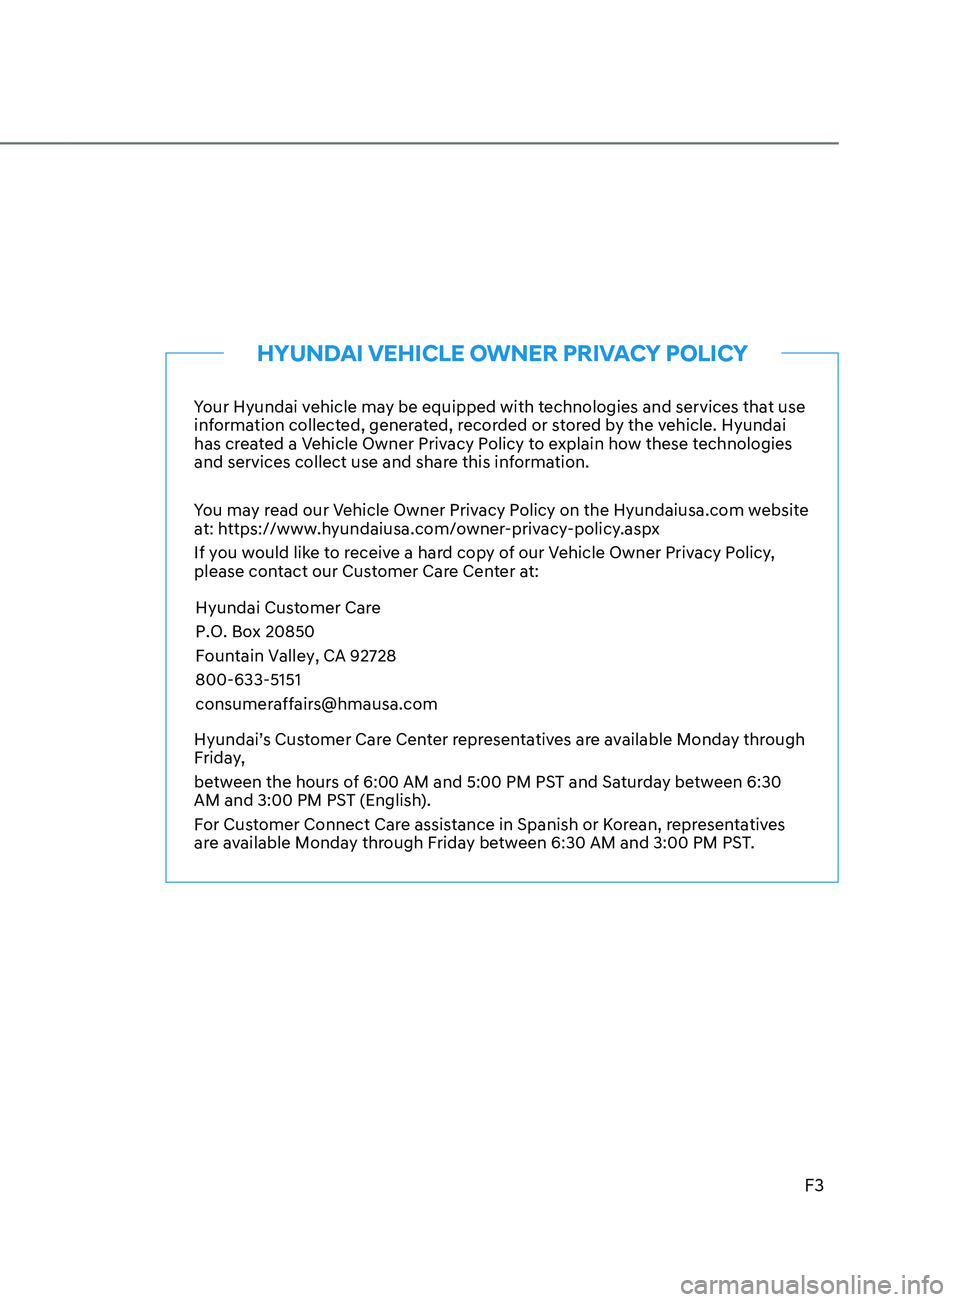 HYUNDAI ELANTRA SEL 2021  Owners Manual F3
Your Hyundai vehicle may be equipped with technologies and services that use 
information collected, generated, recorded or stored by the vehicle. Hyundai 
has created a Vehicle Owner Privacy Polic